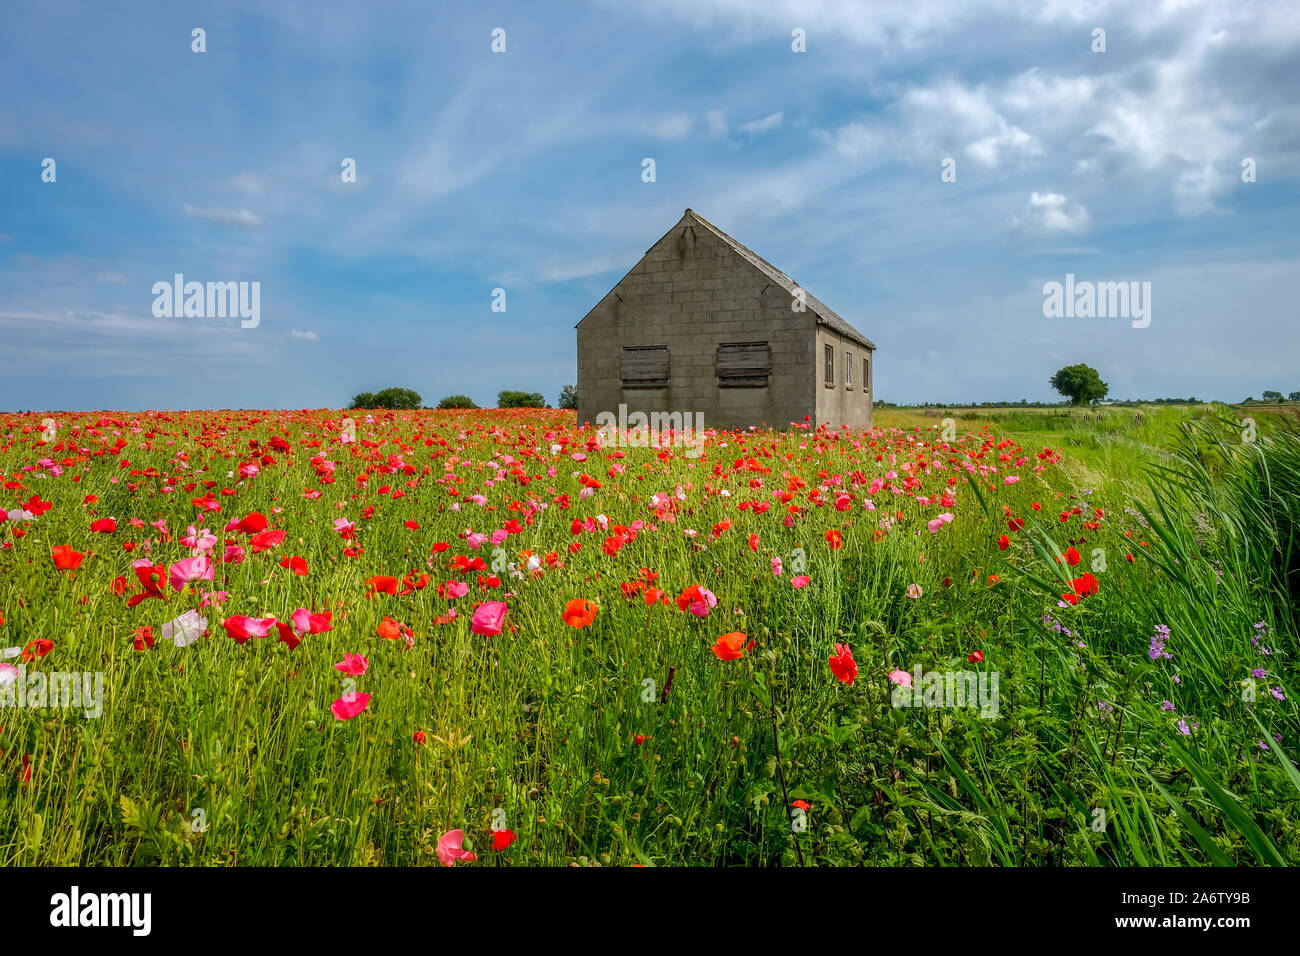 Field with vivid poppies with old barn Stock Photo